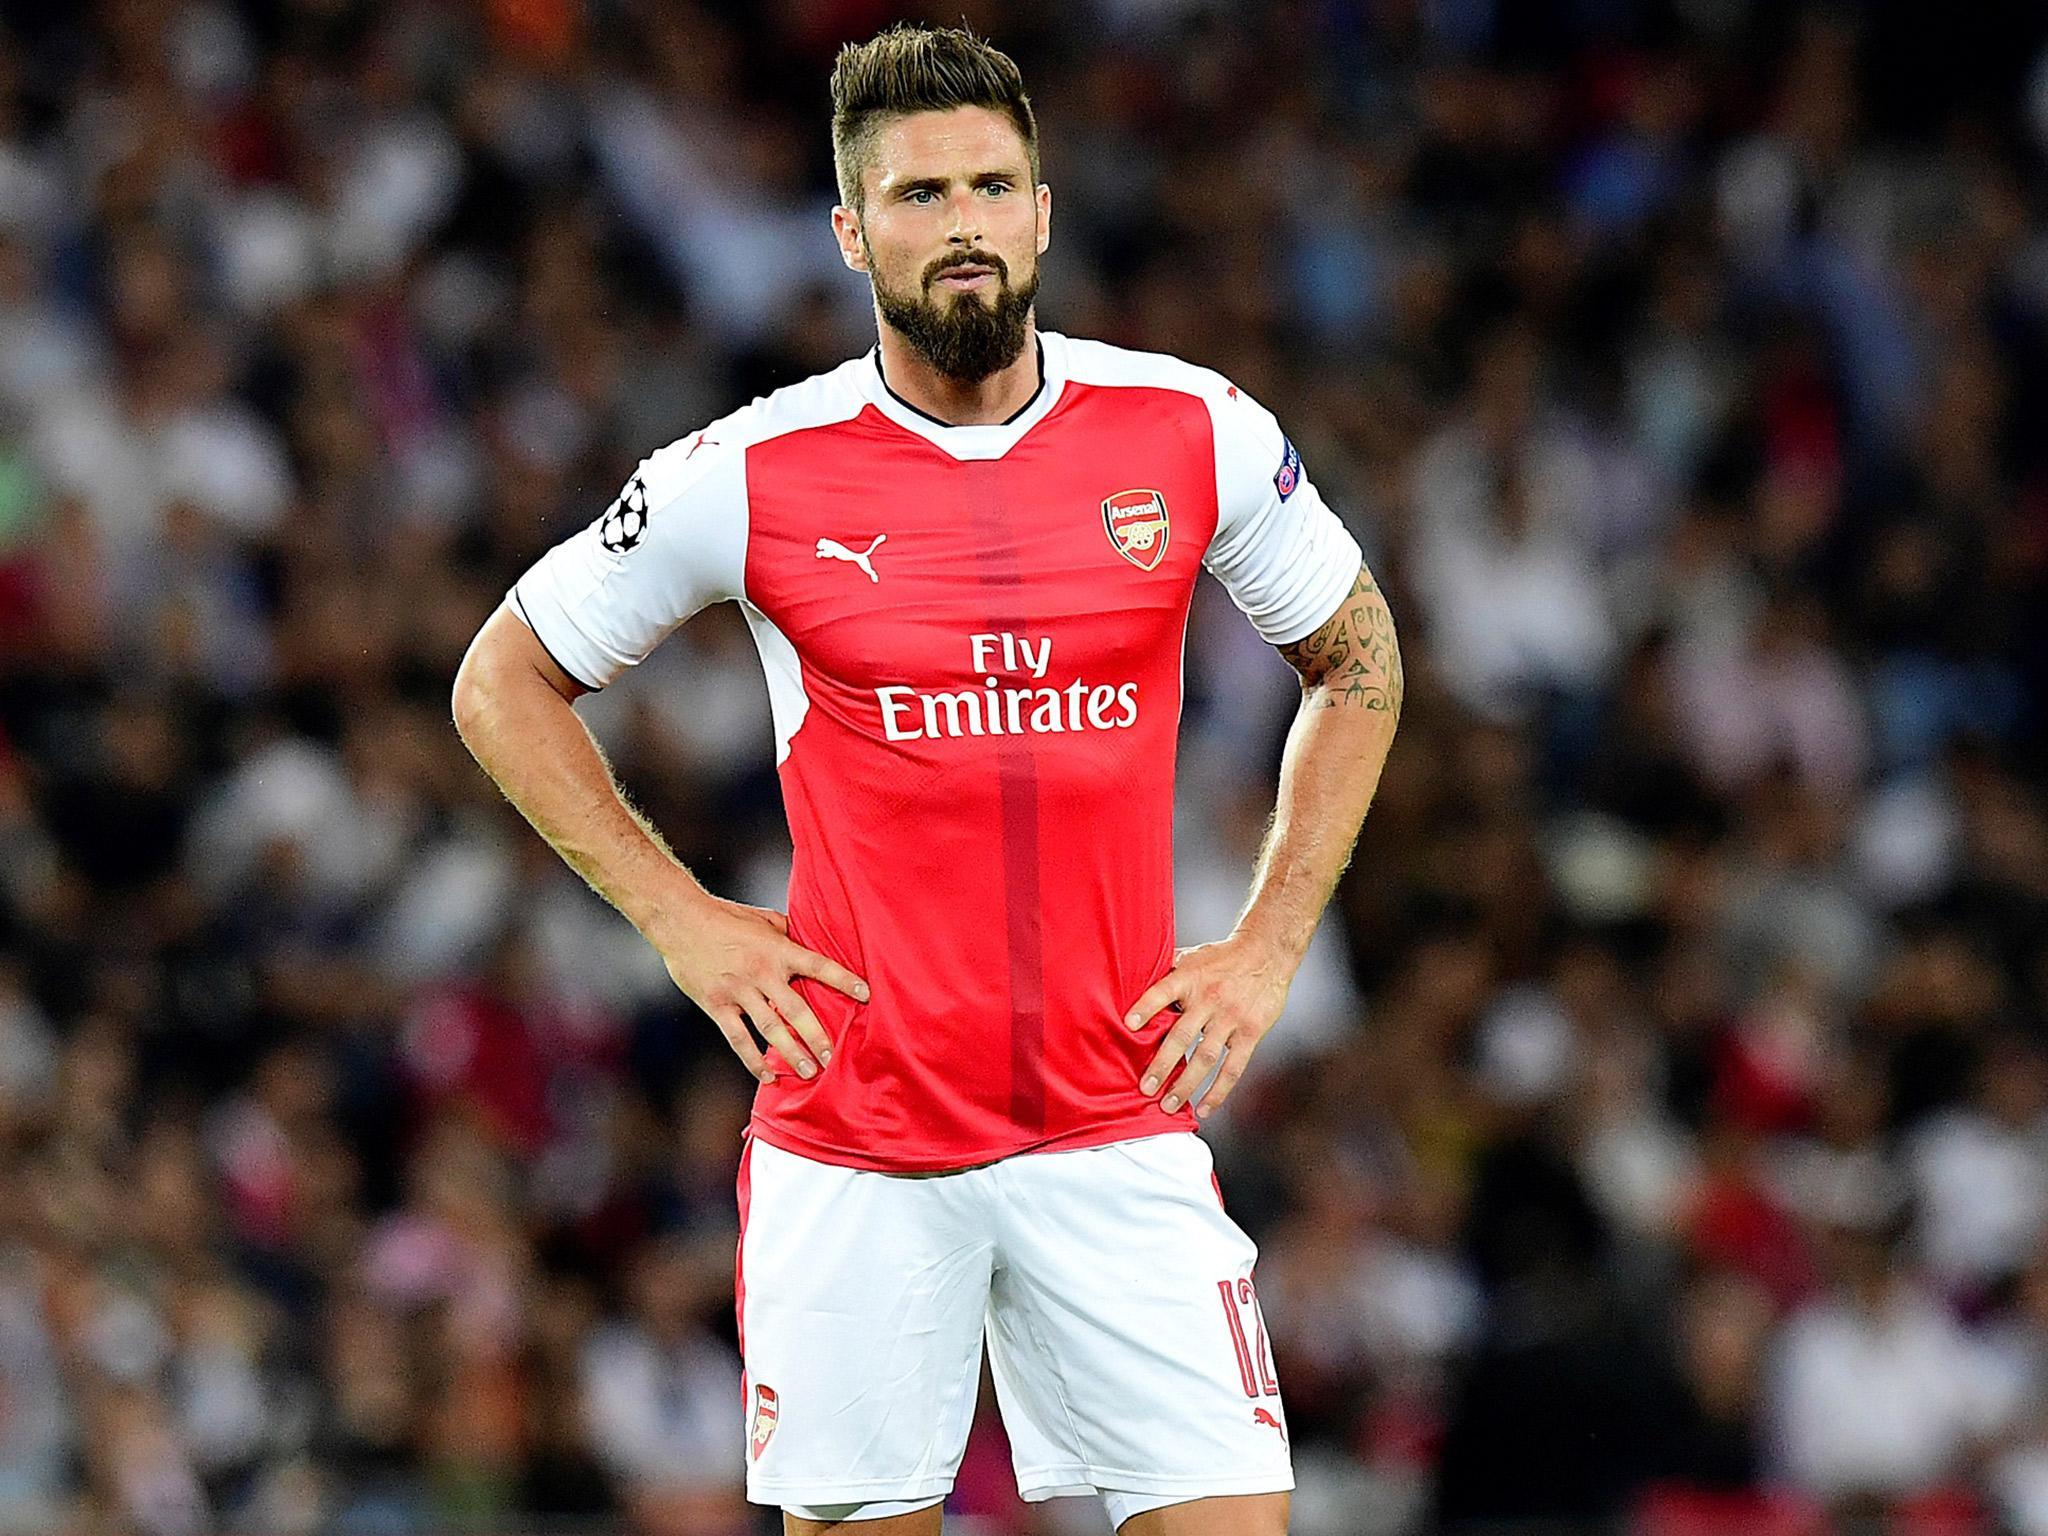 Olivier Giroud has scored three goals in nine appearances for Arsenal this season